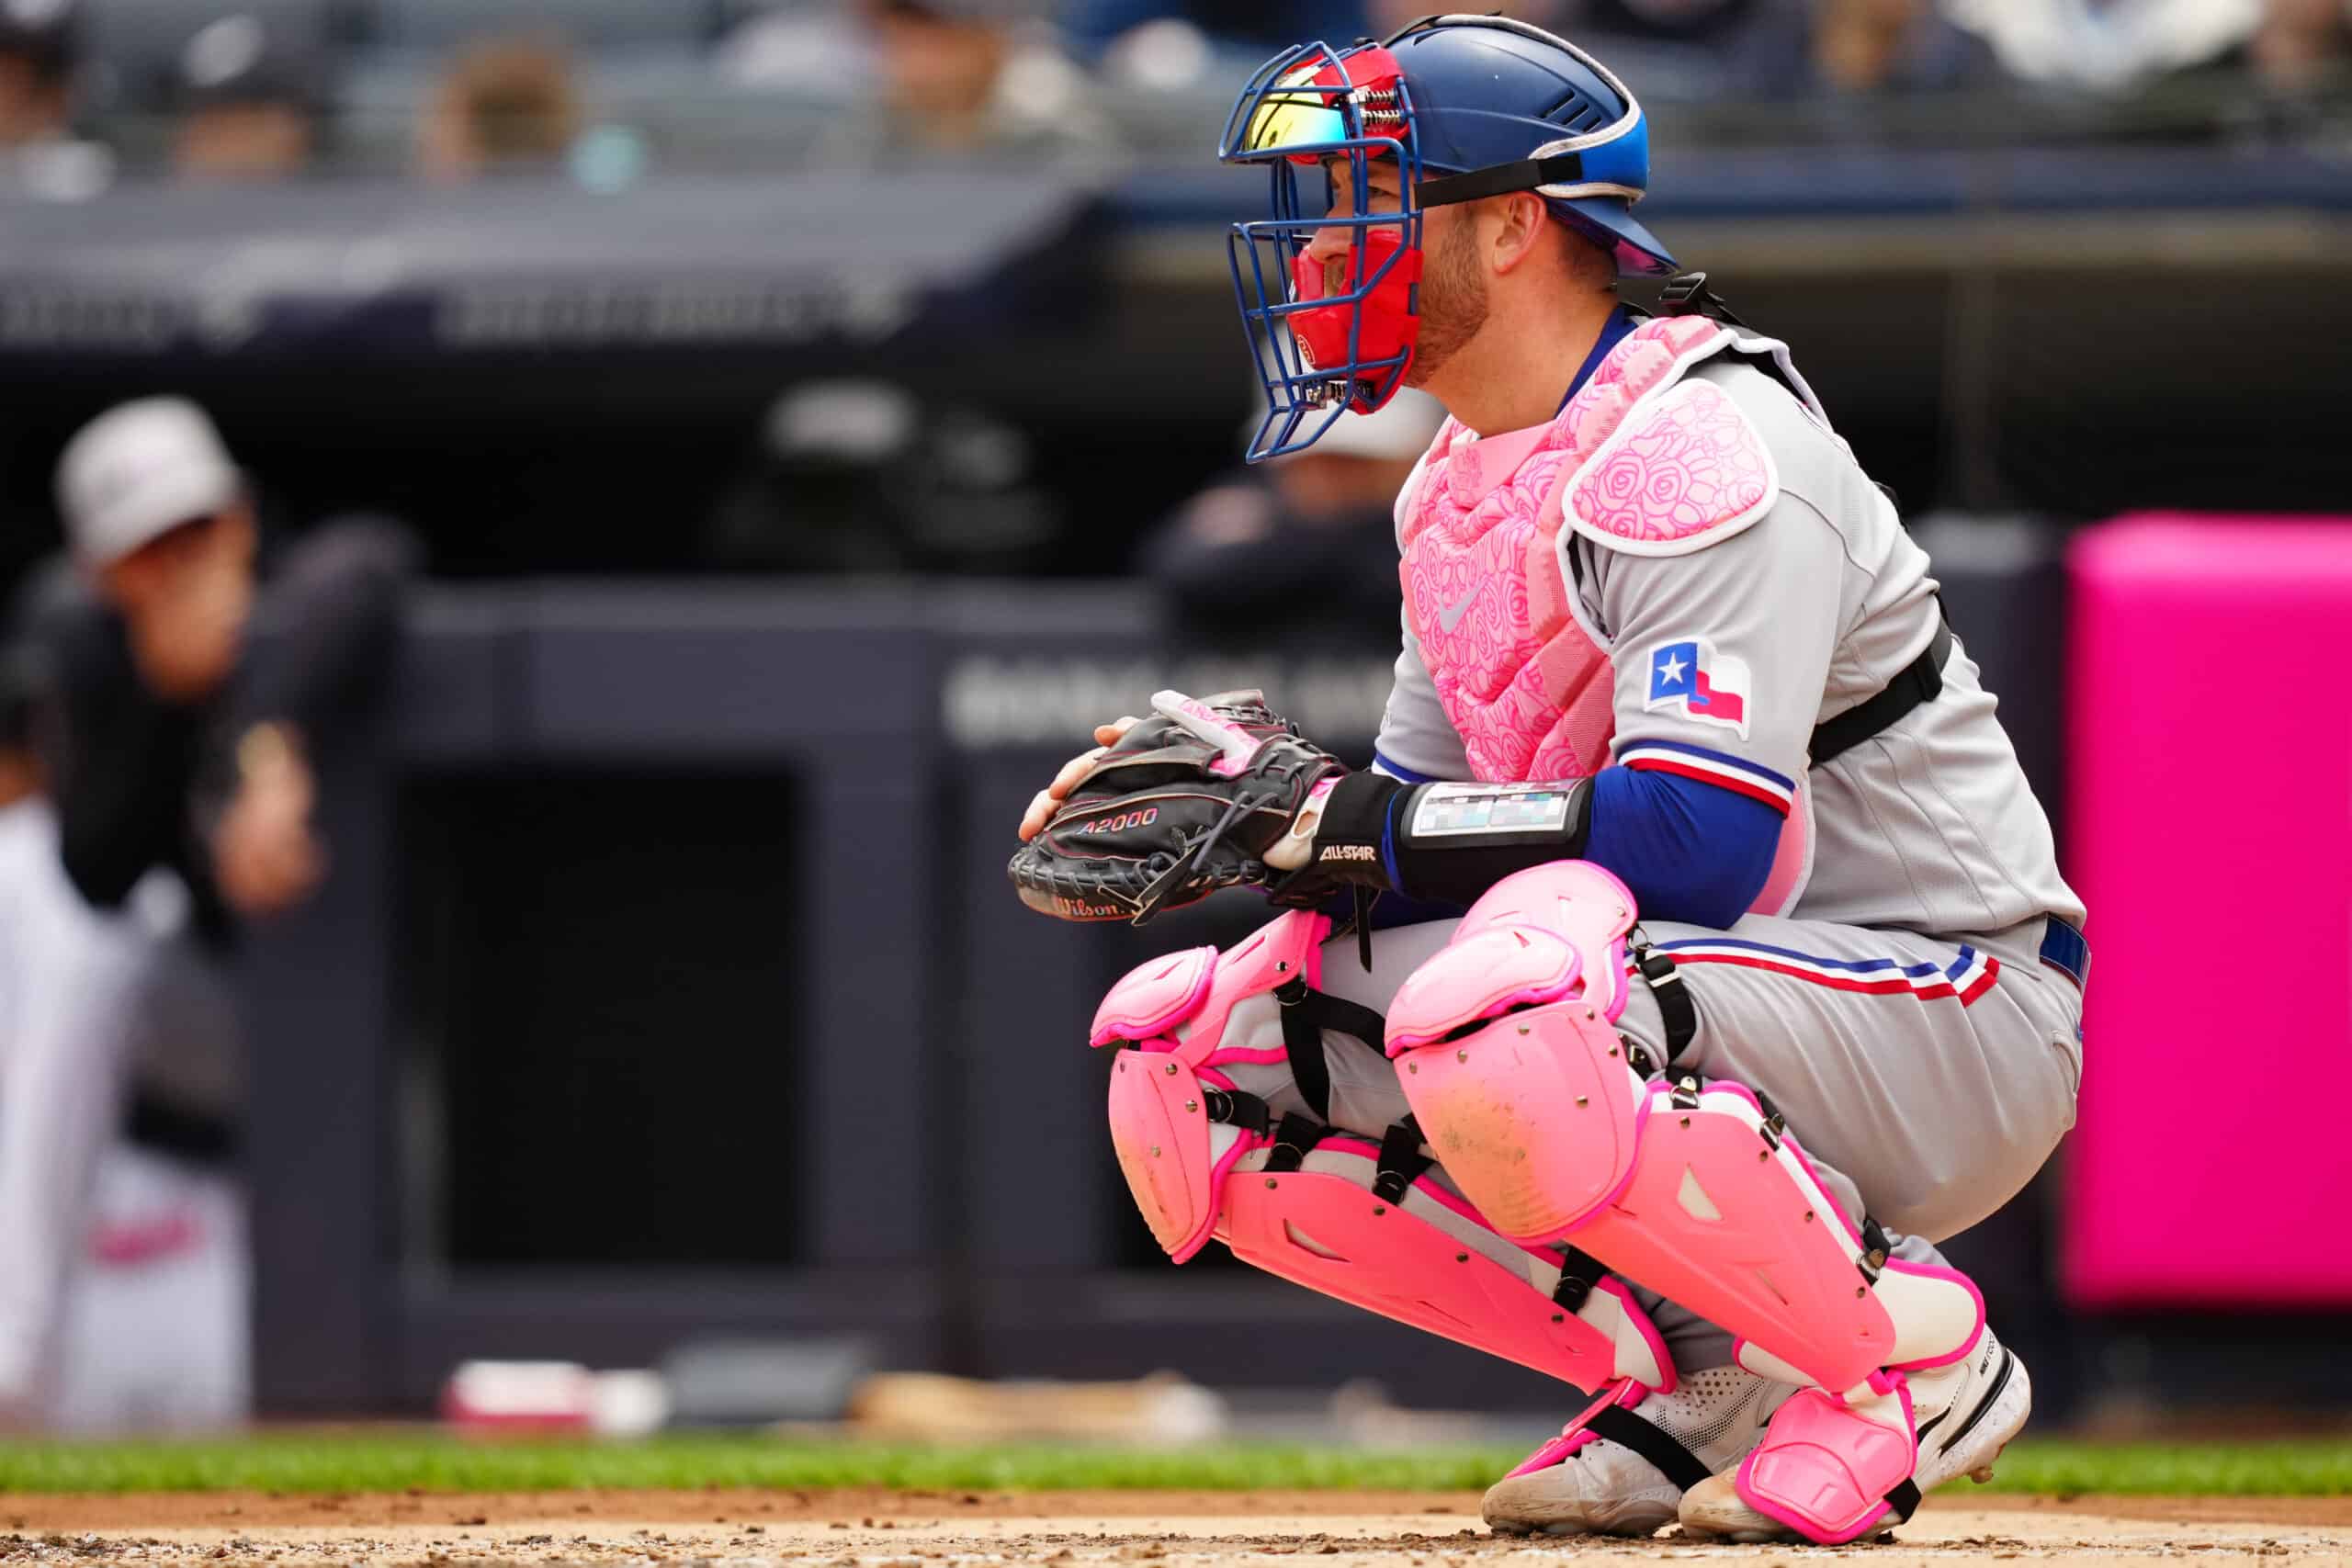 yankees breast cancer jersey